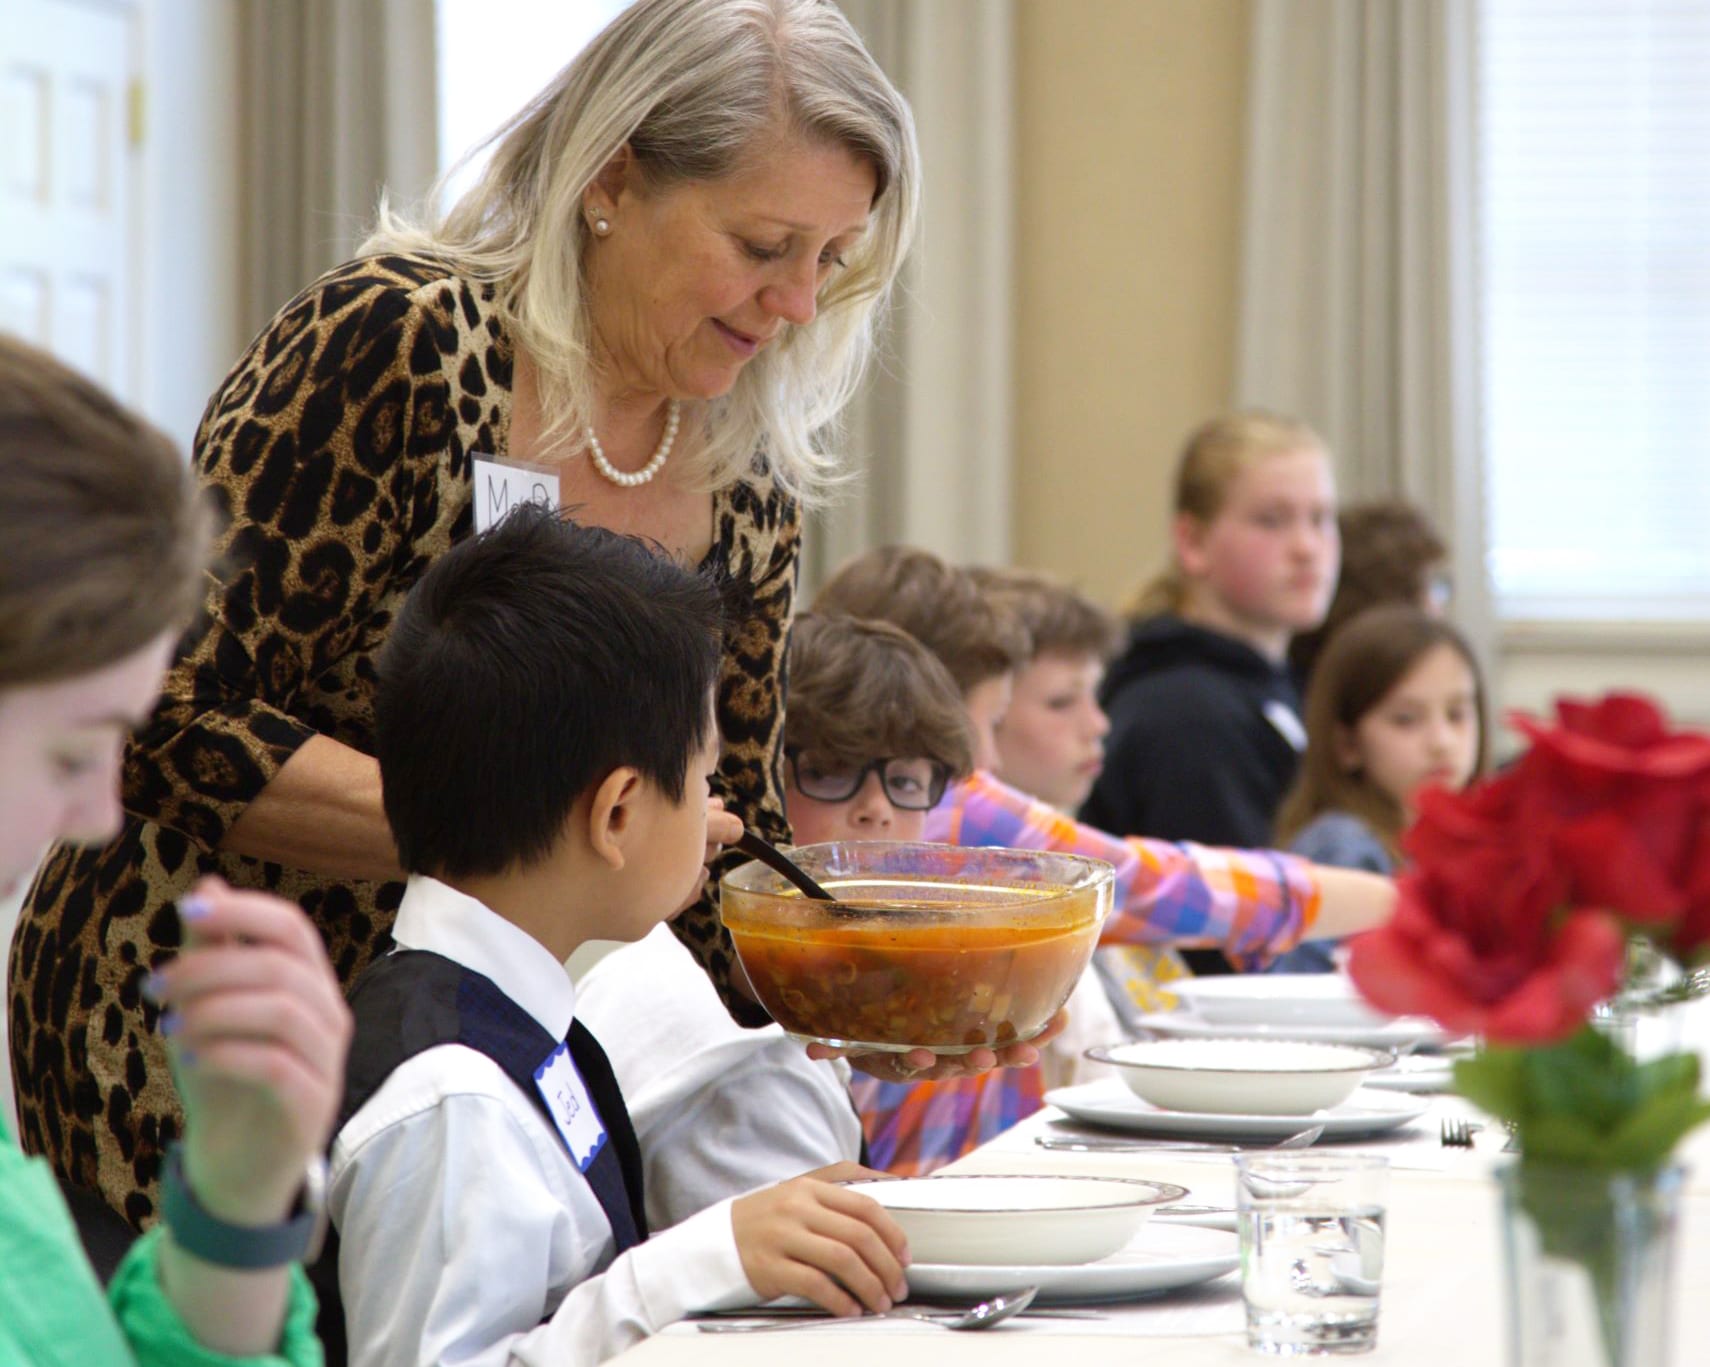 Etiquette students learning to eat soup